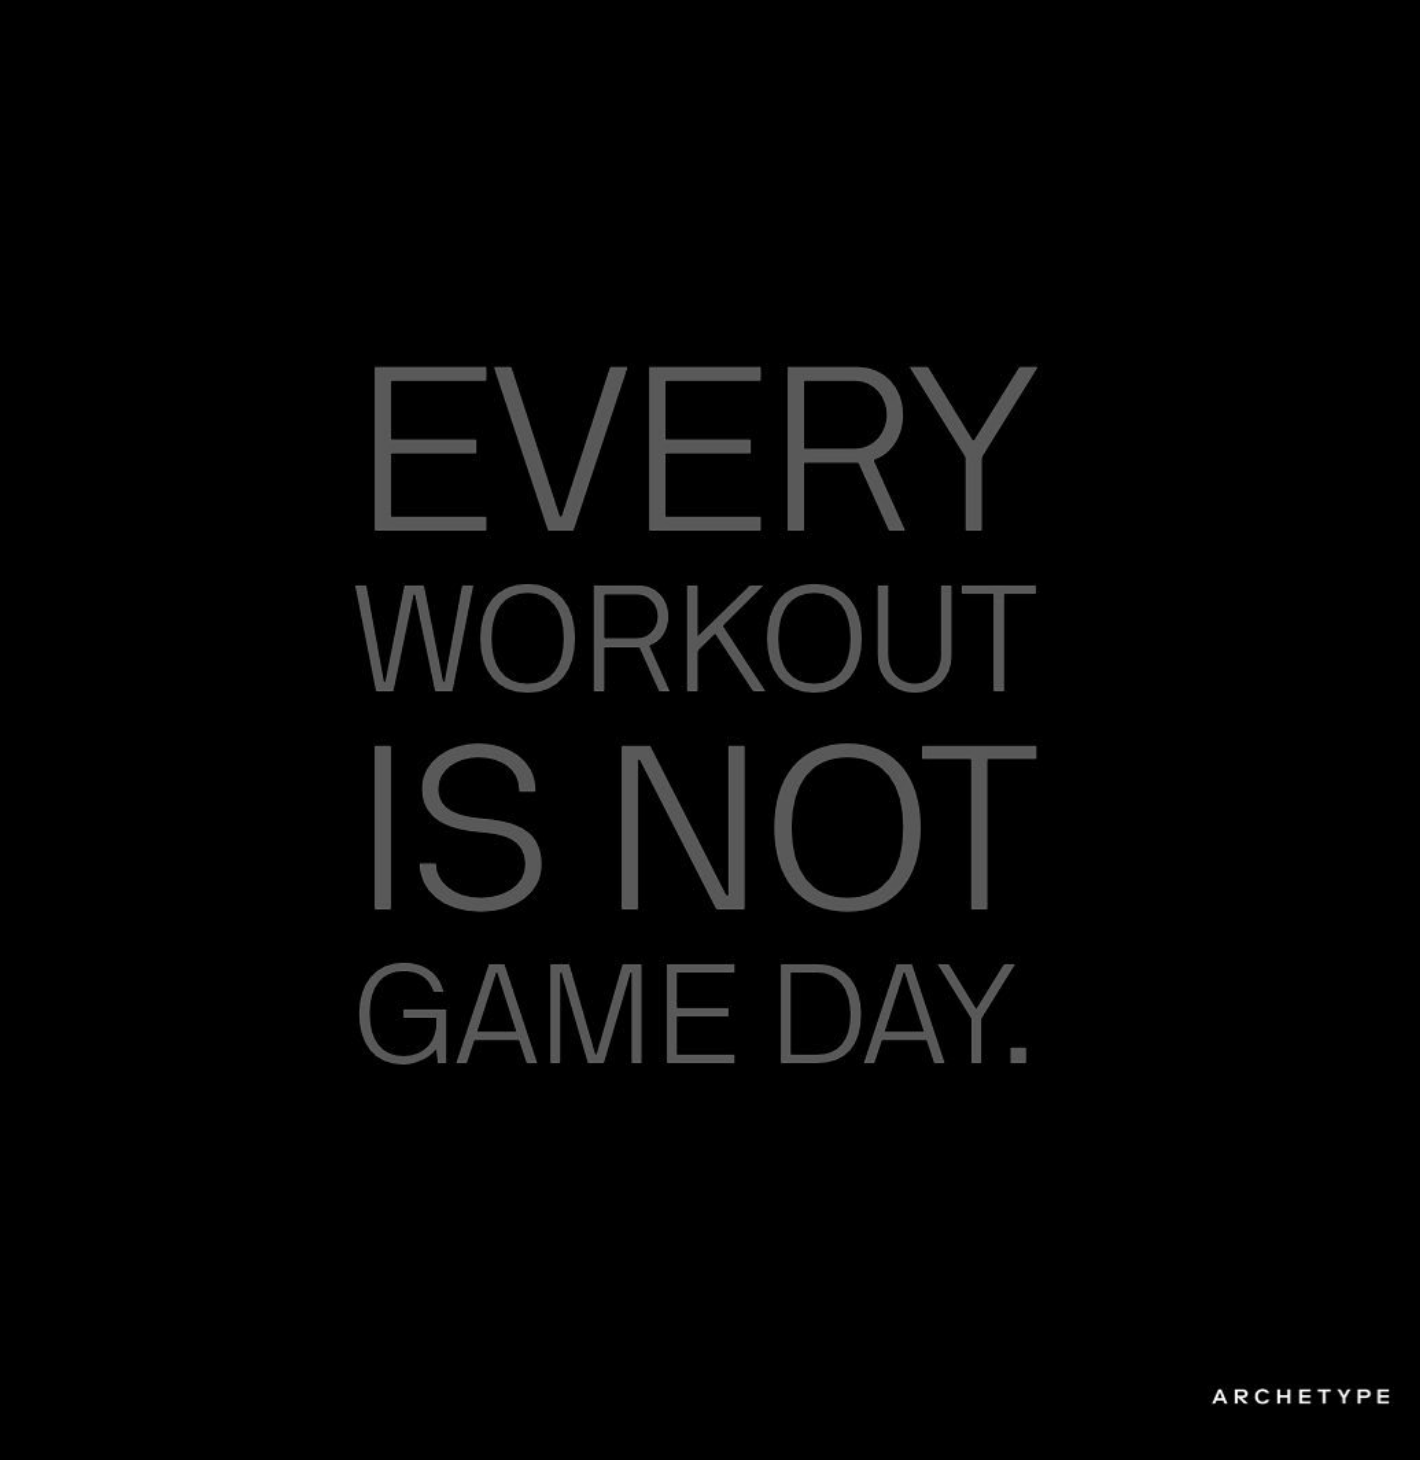 Every Workout is Not Game Day!